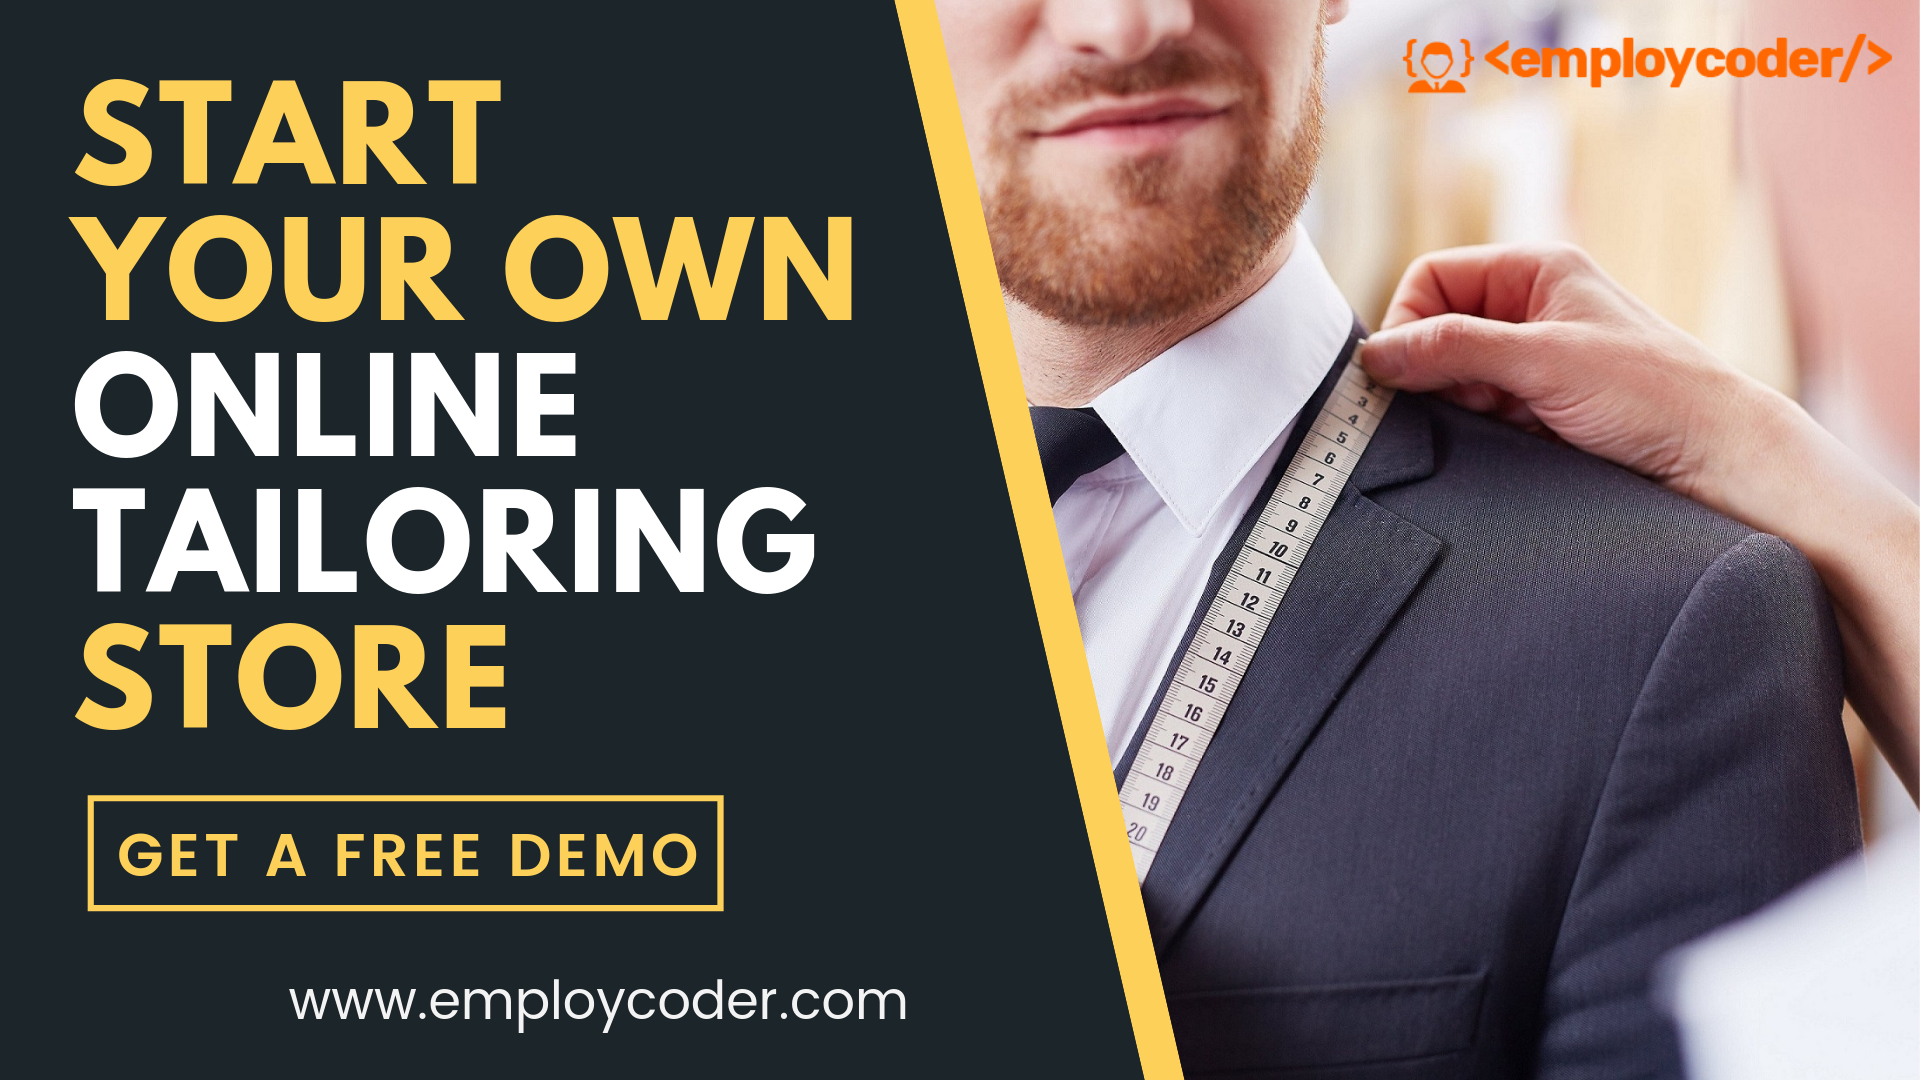 Start your Online Tailoring Store with Custom Tailoring Software - Employcoder